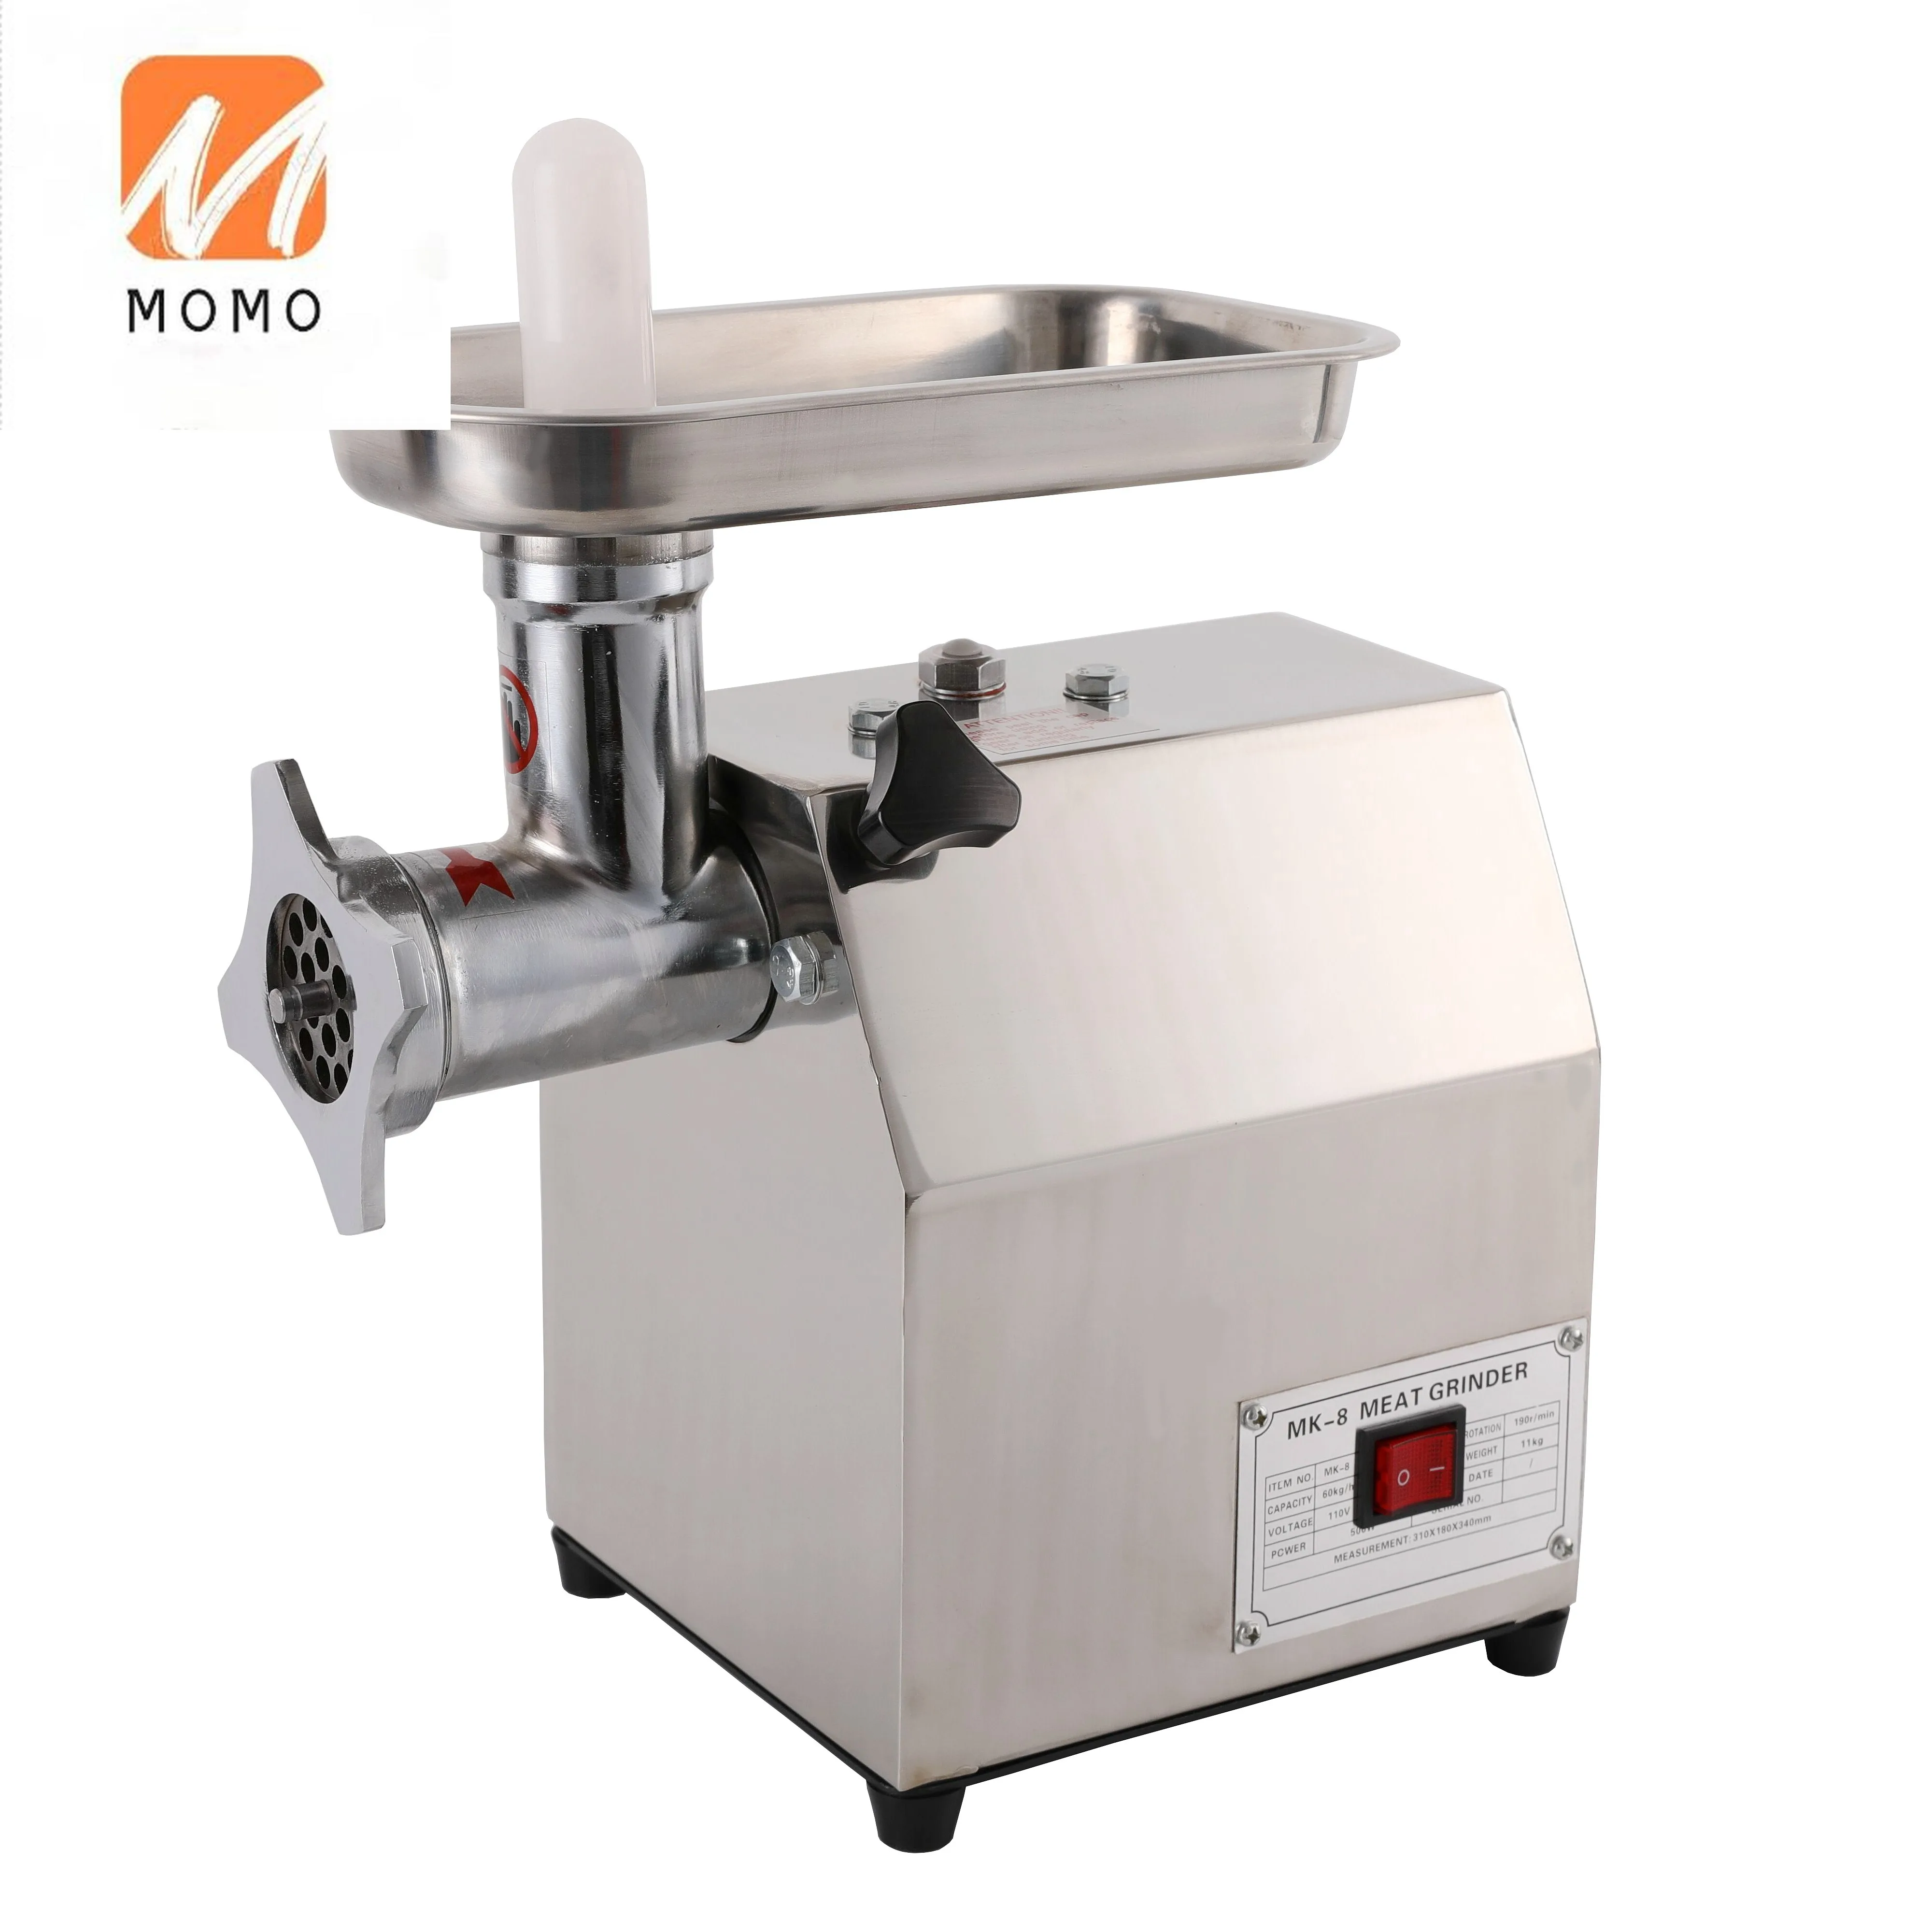 https://ae01.alicdn.com/kf/H47cf9d0ab66640dfa01b8a20fd83c5b4m/8-Type-Commercial-Industrial-Meat-Grinder-Price-Electric-Meat-Mincer.jpg